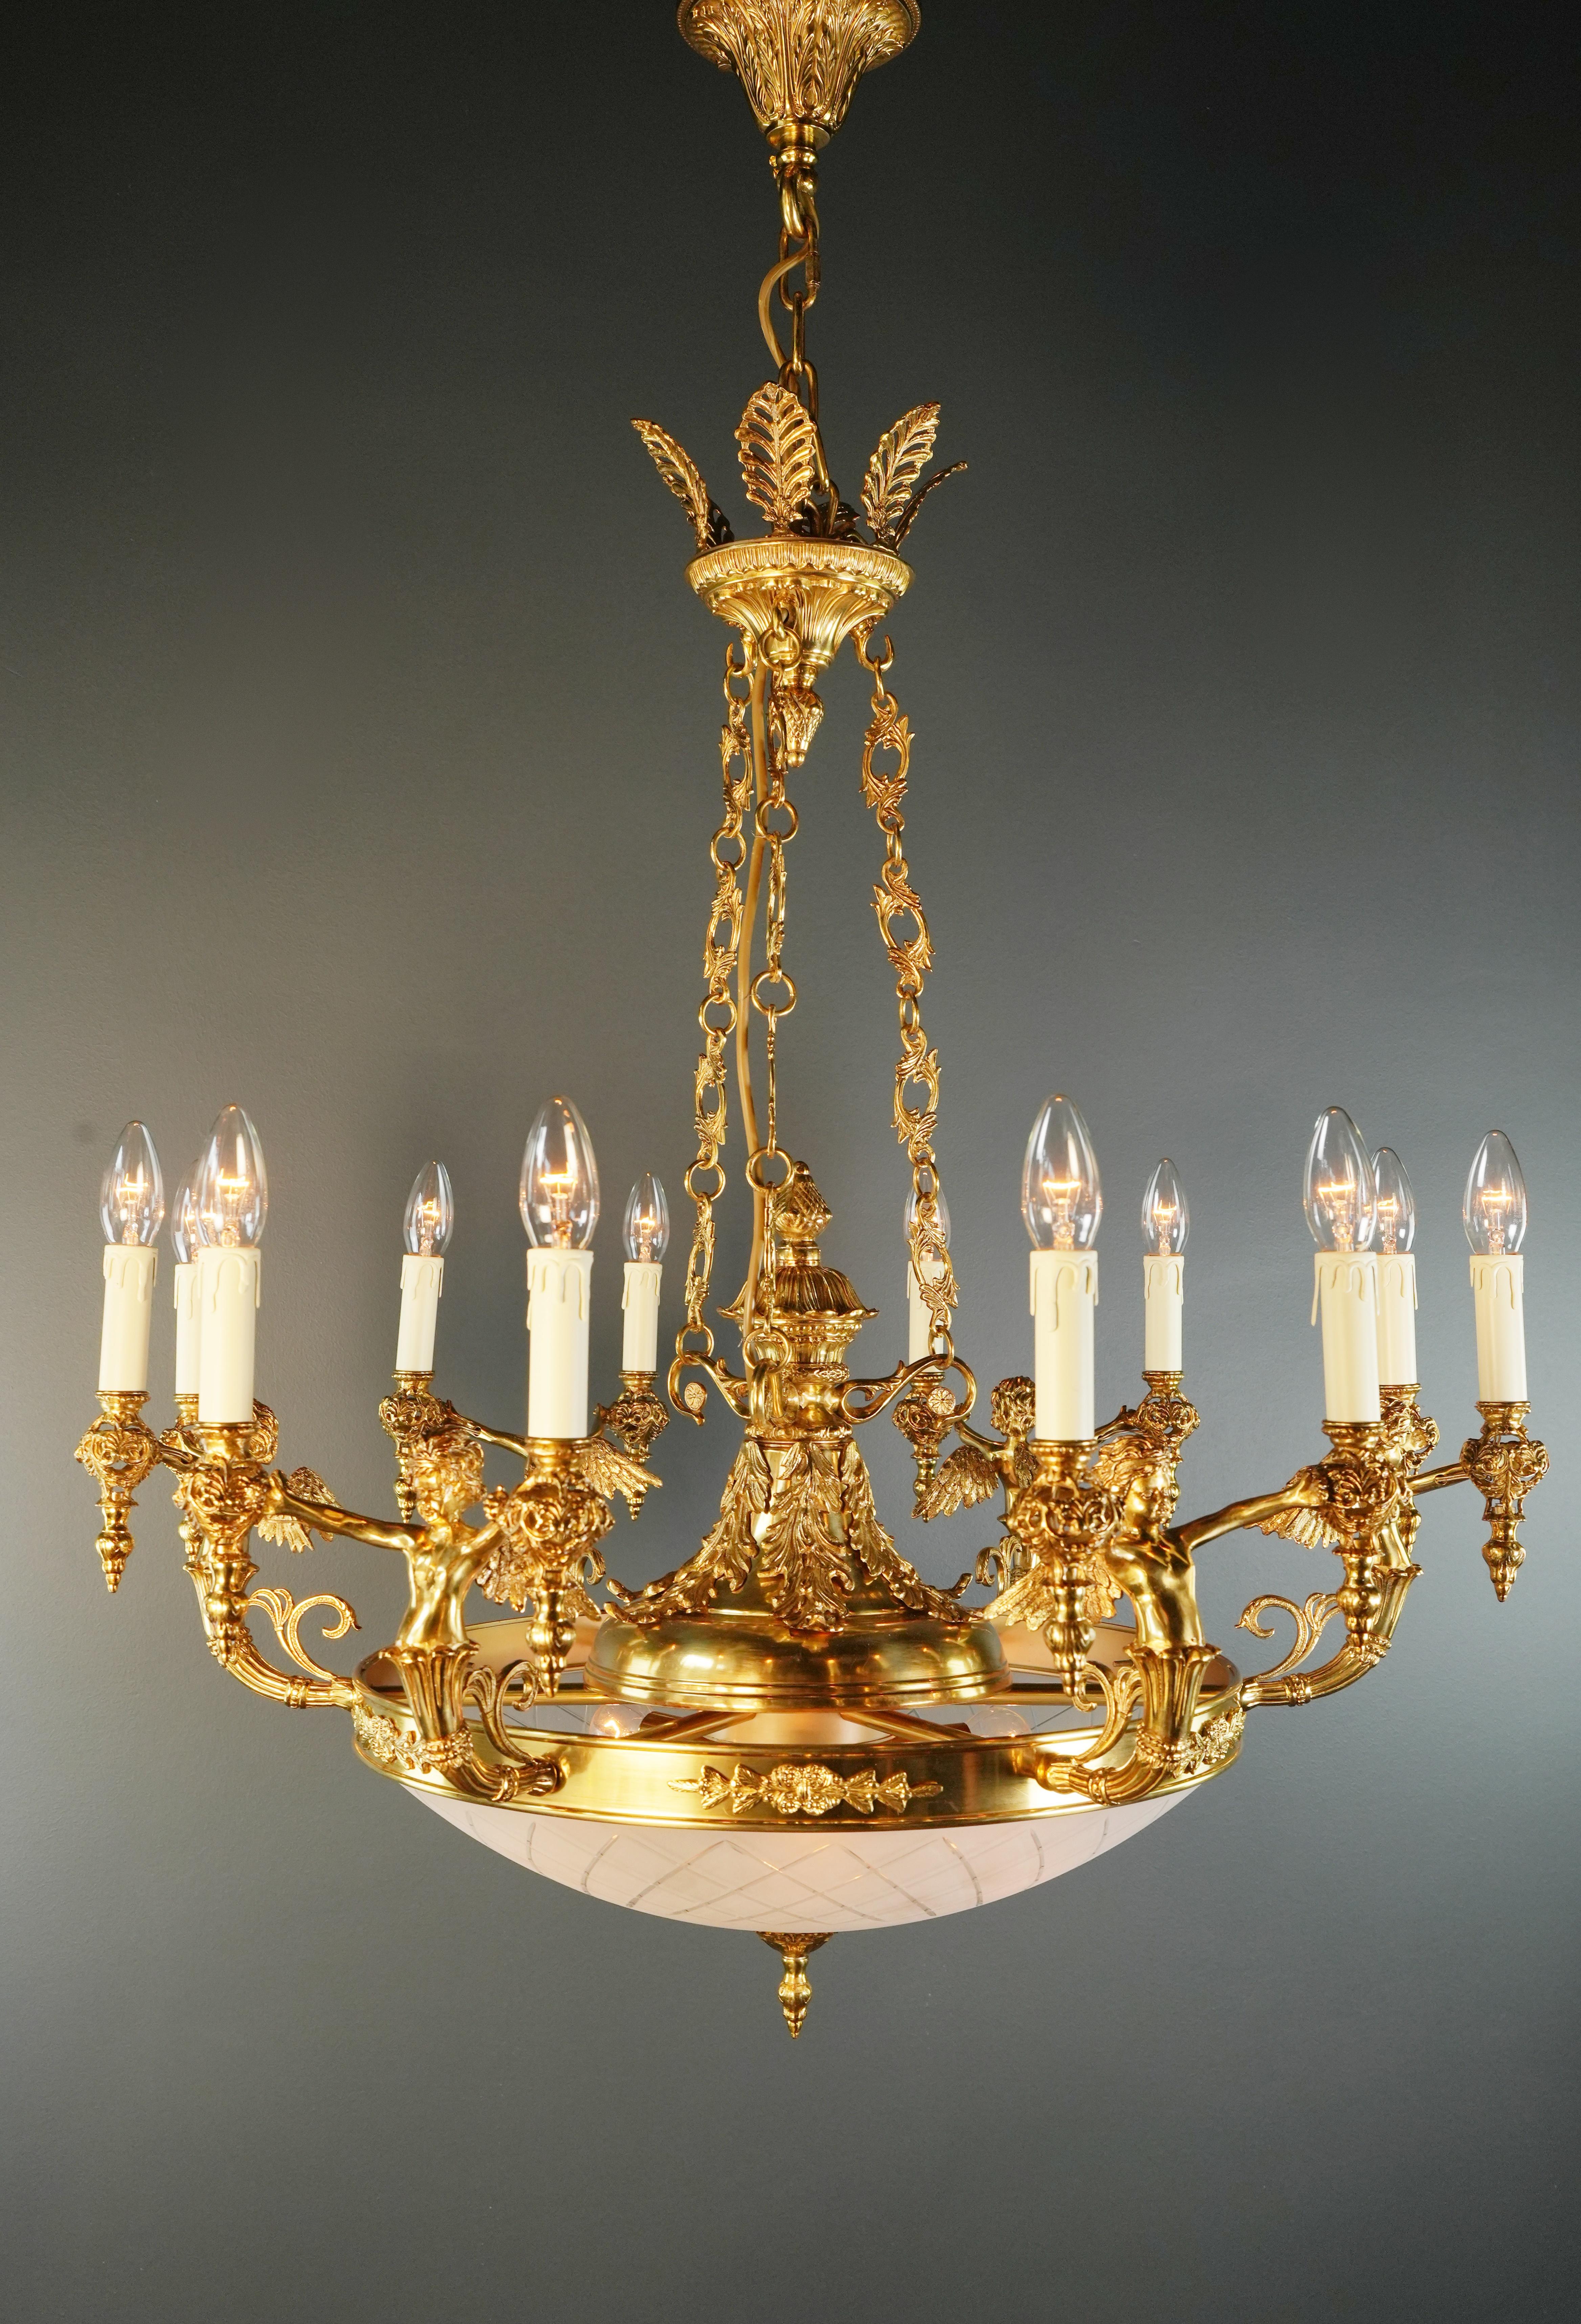 Contemporary Angel Brass Empire Chandelier Lustre Lamp Antique Gold For Sale